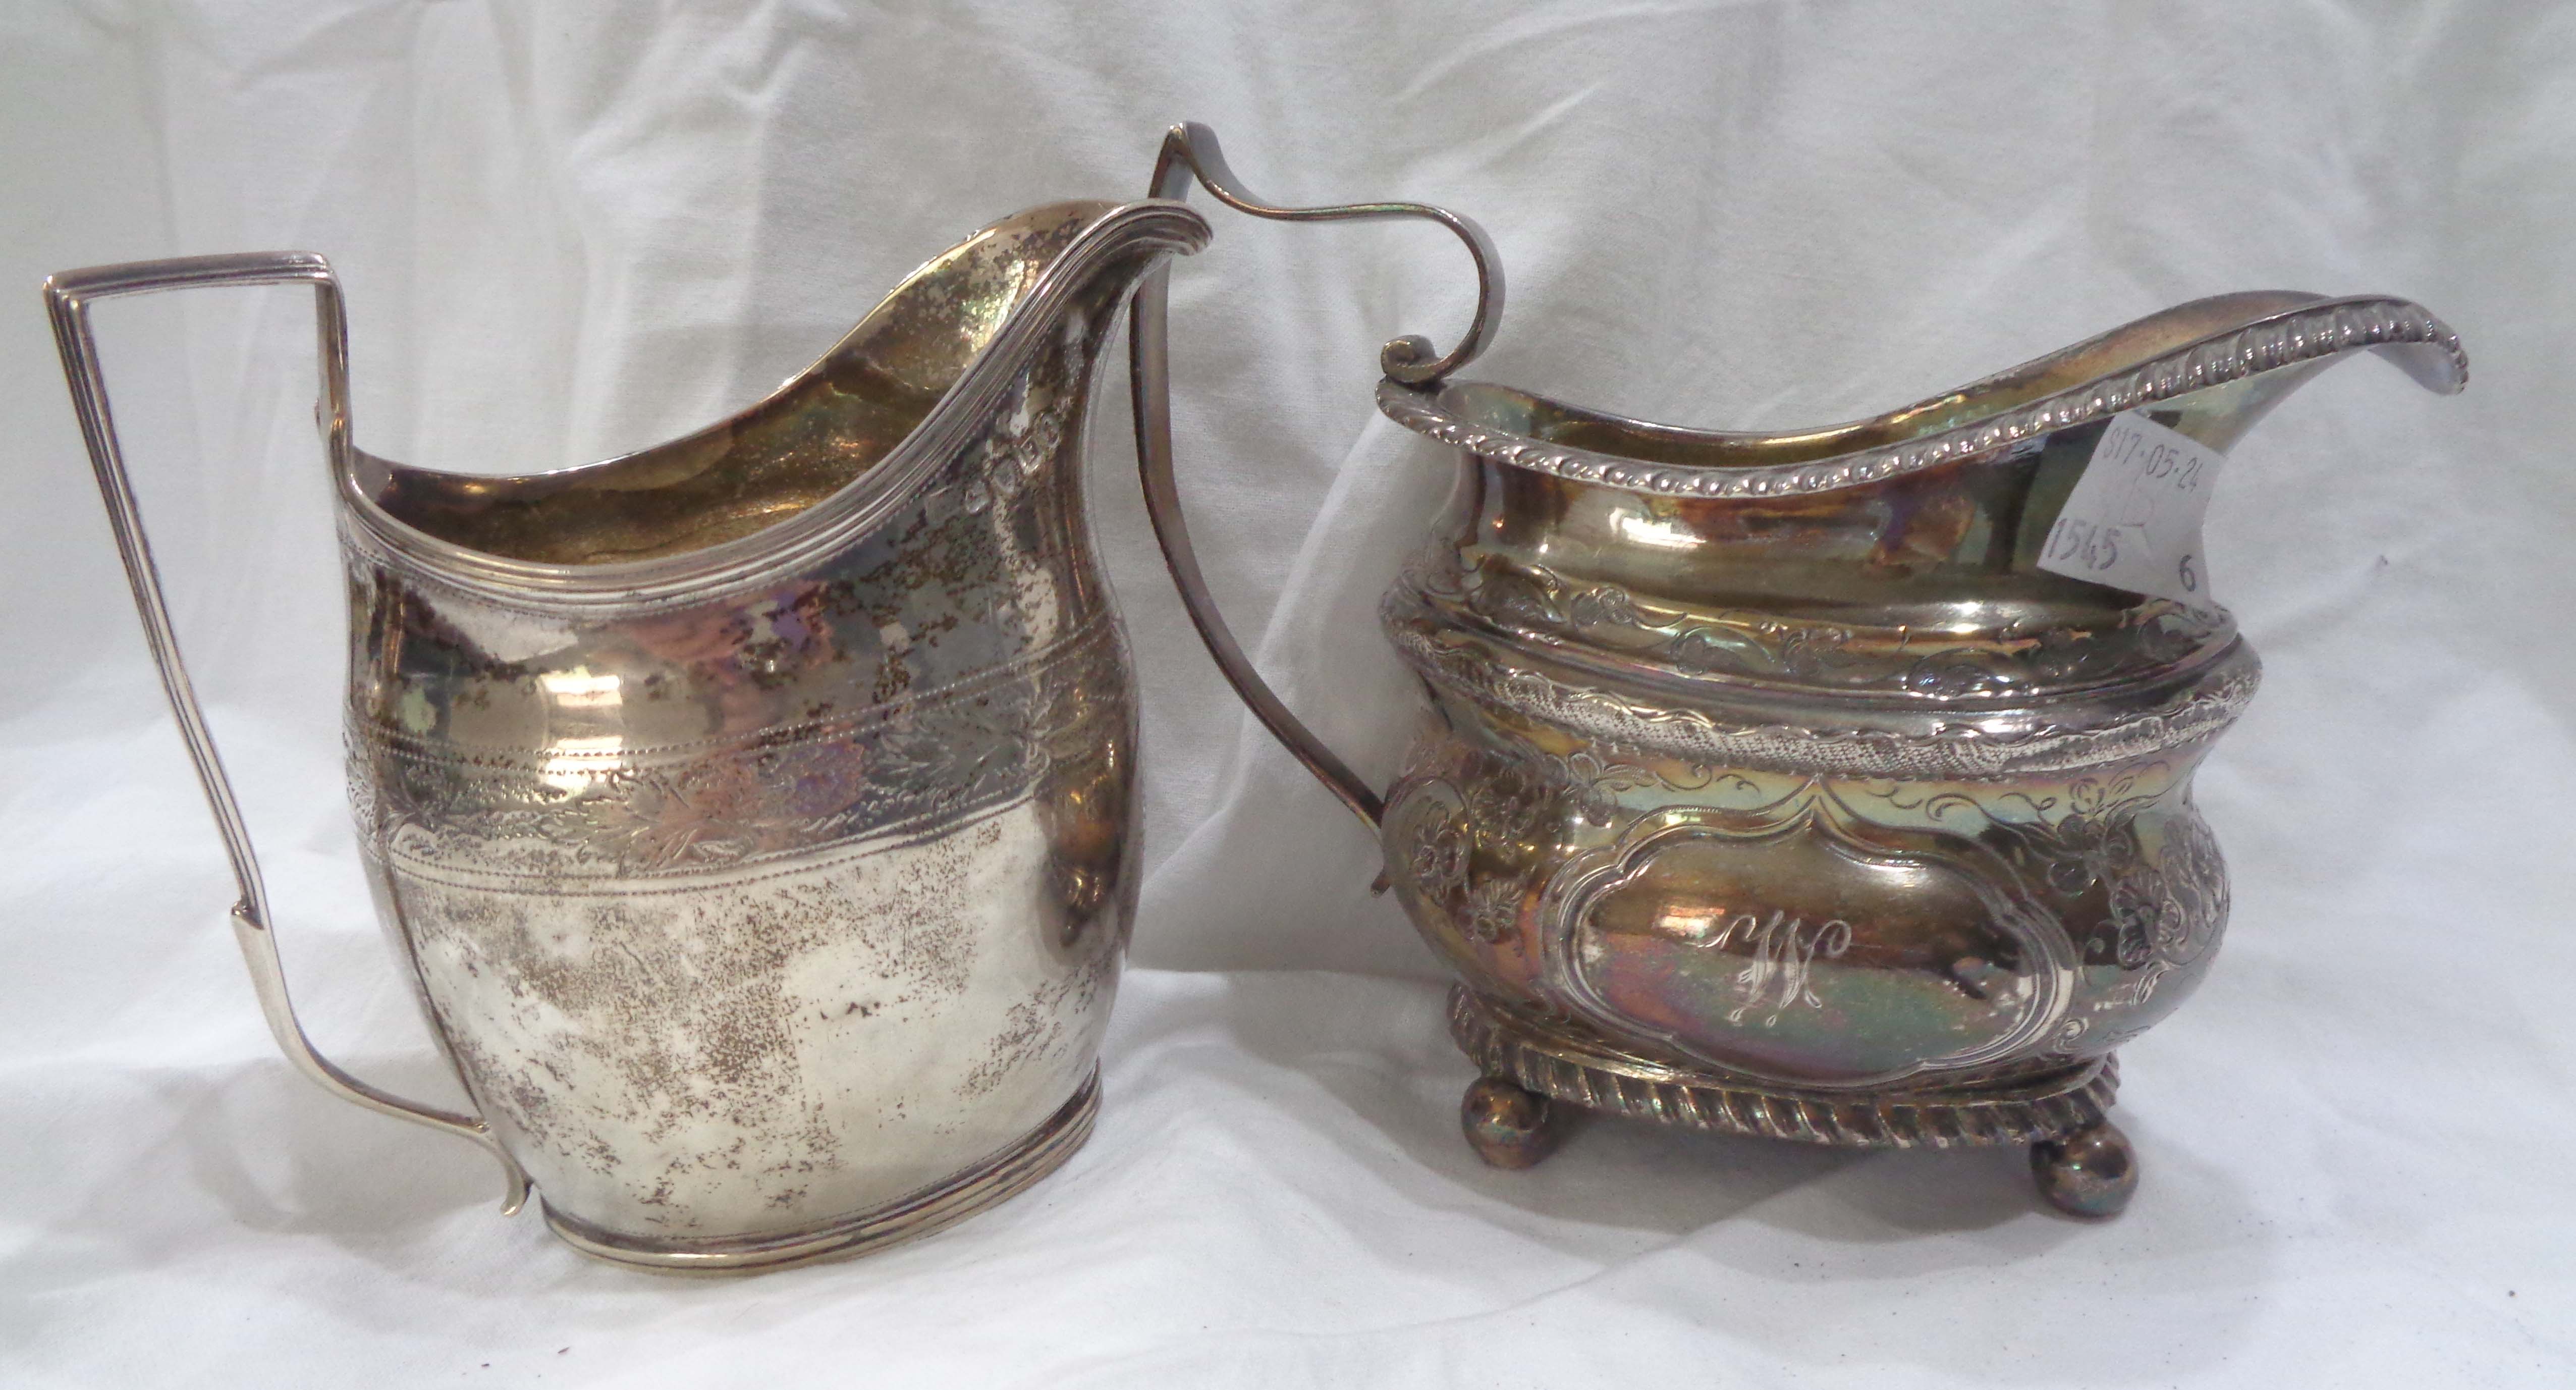 A George III silver cream jug with pricket decoration and initials to front - London 1801 - sold